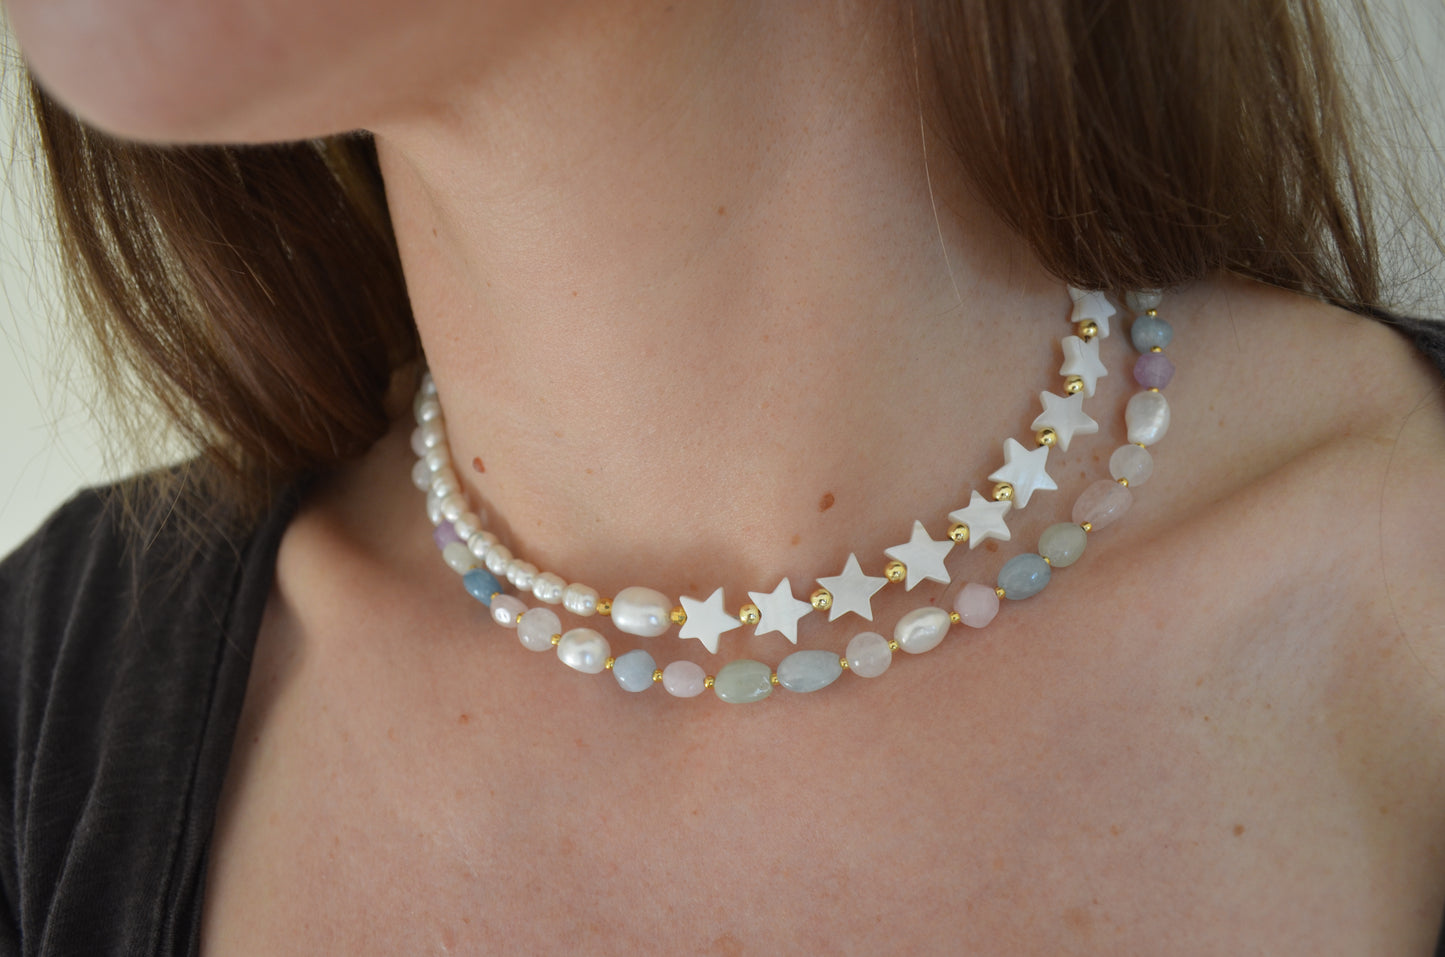 Asymmetric Pearls and Stars necklace